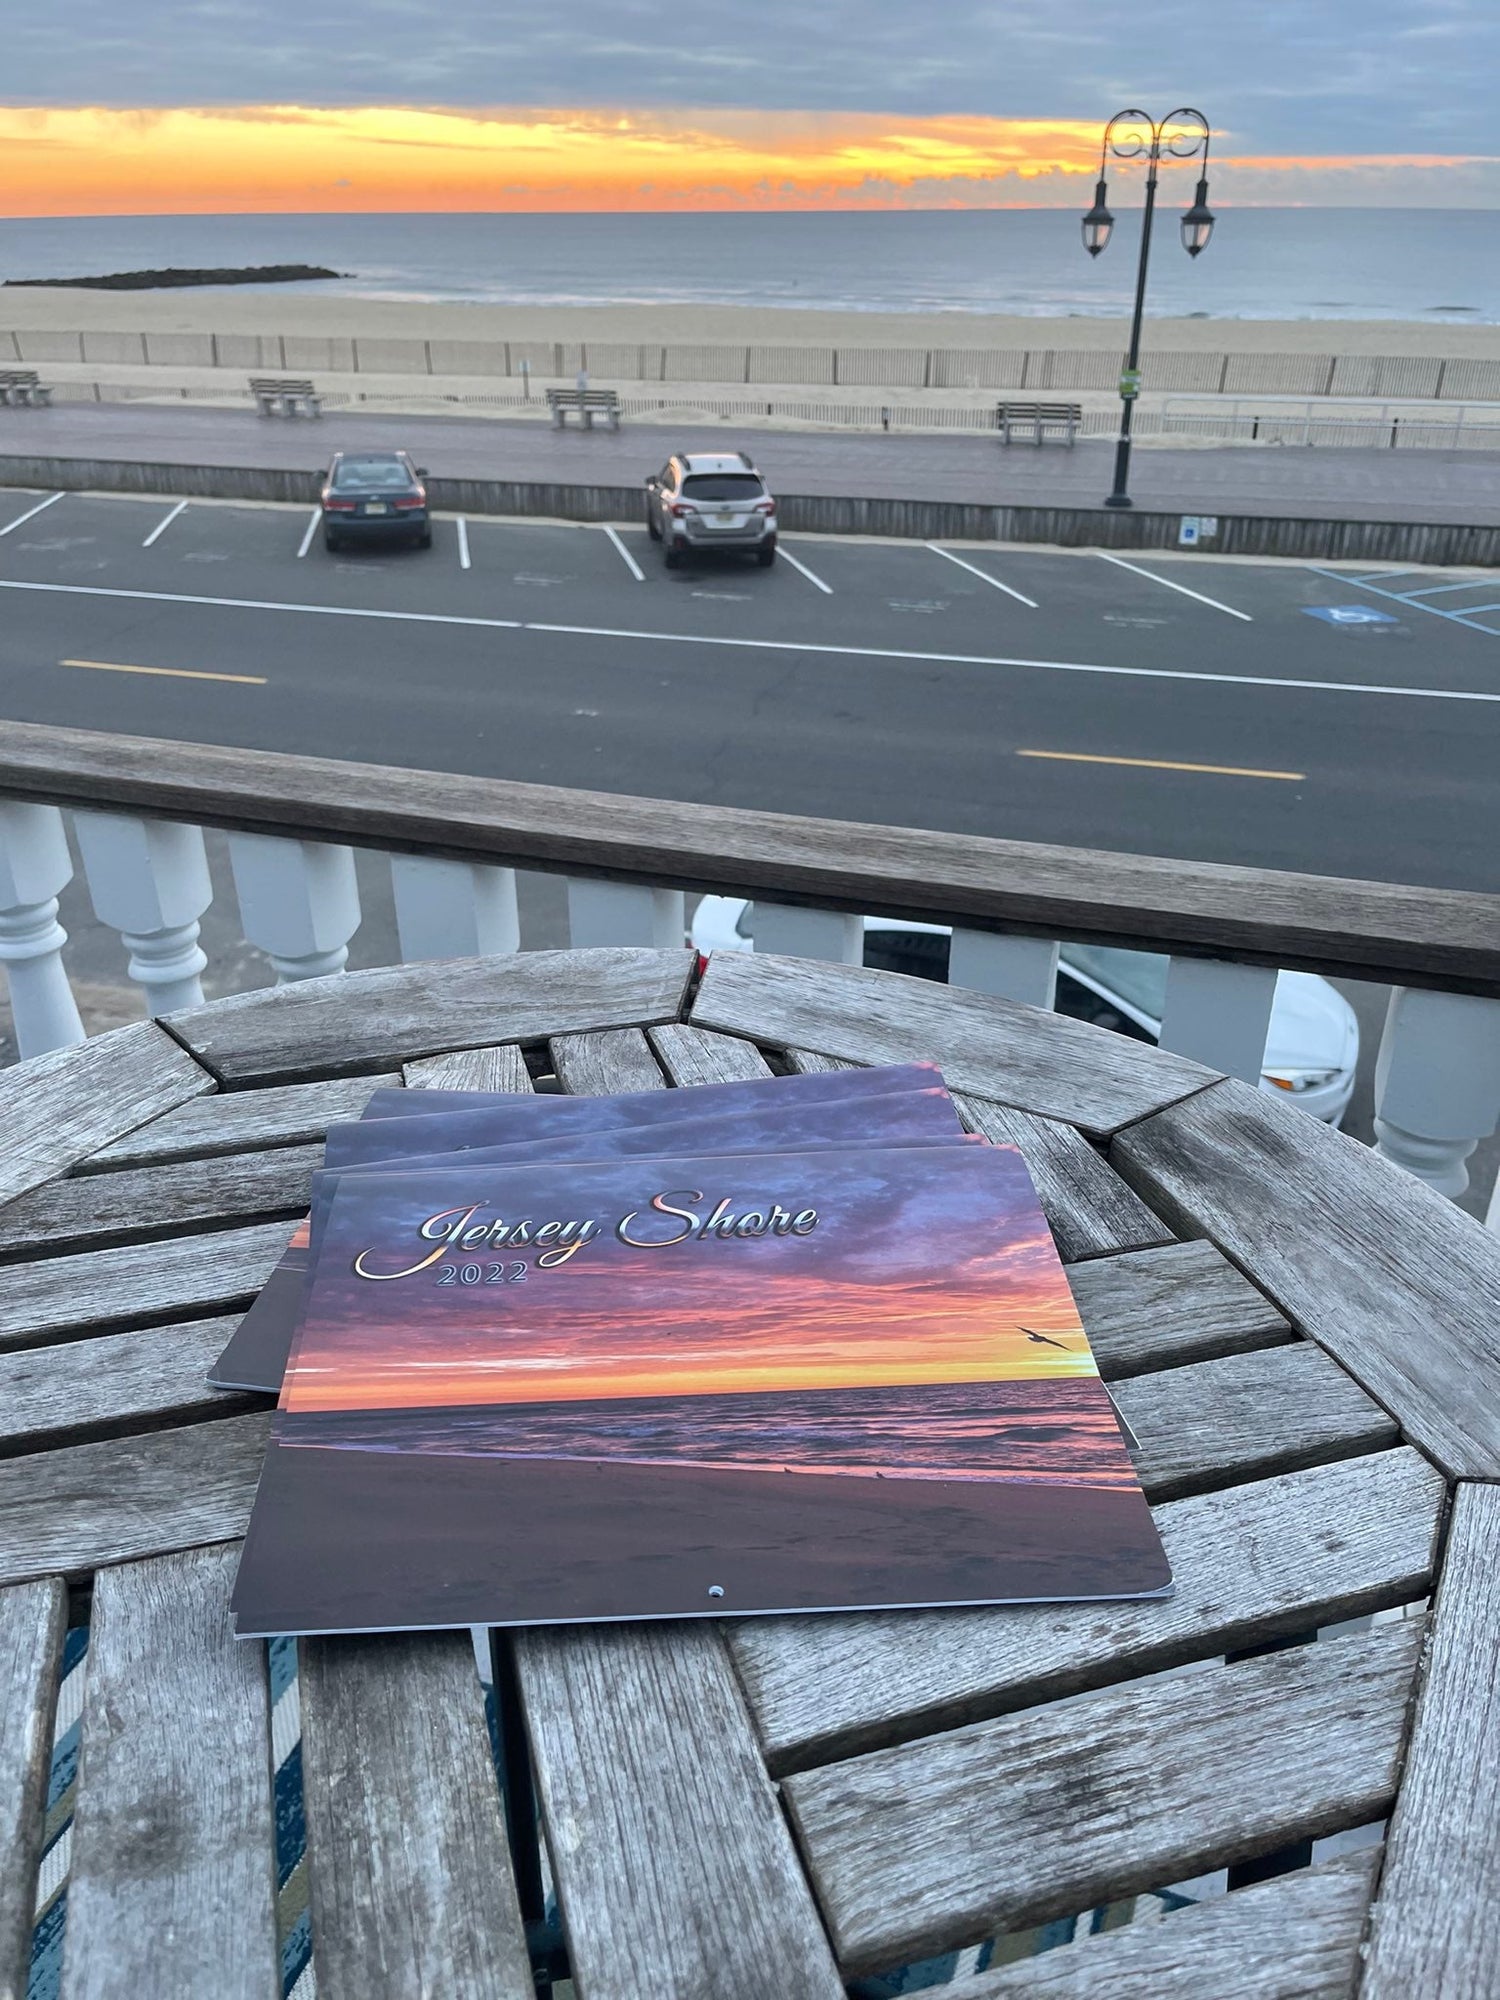 I am thrilled with the Jersey Shore 2022 photography calendar order yours now